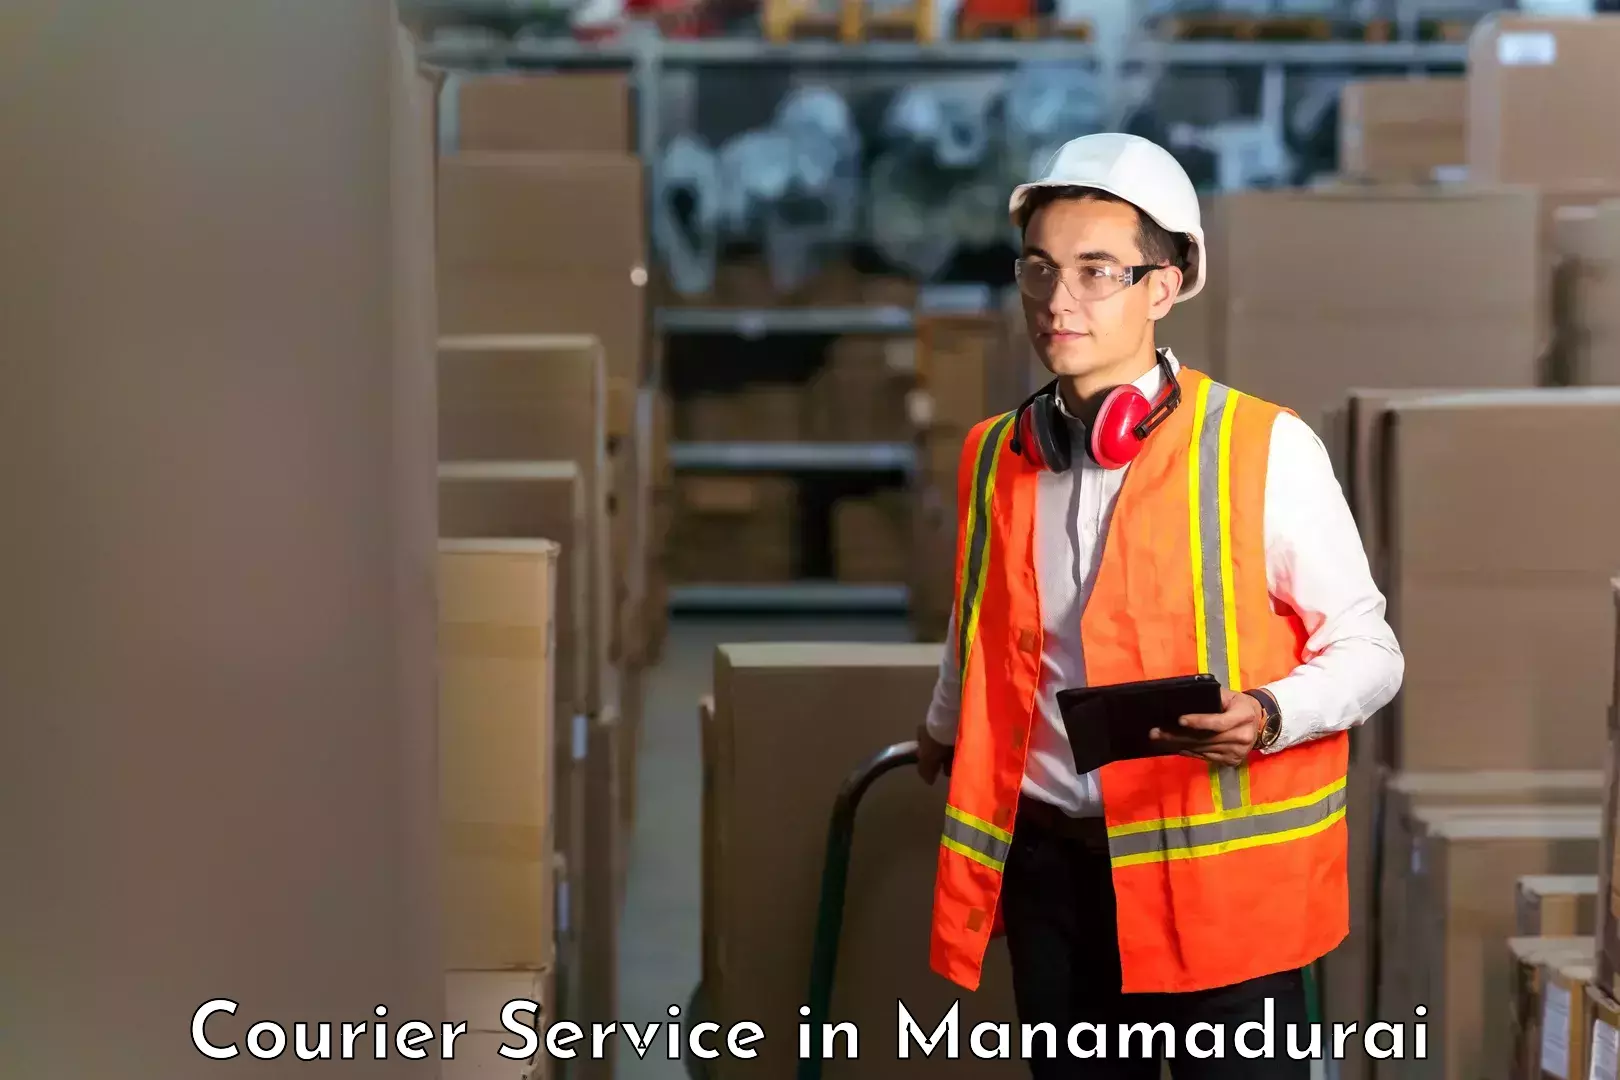 High-quality delivery services in Manamadurai